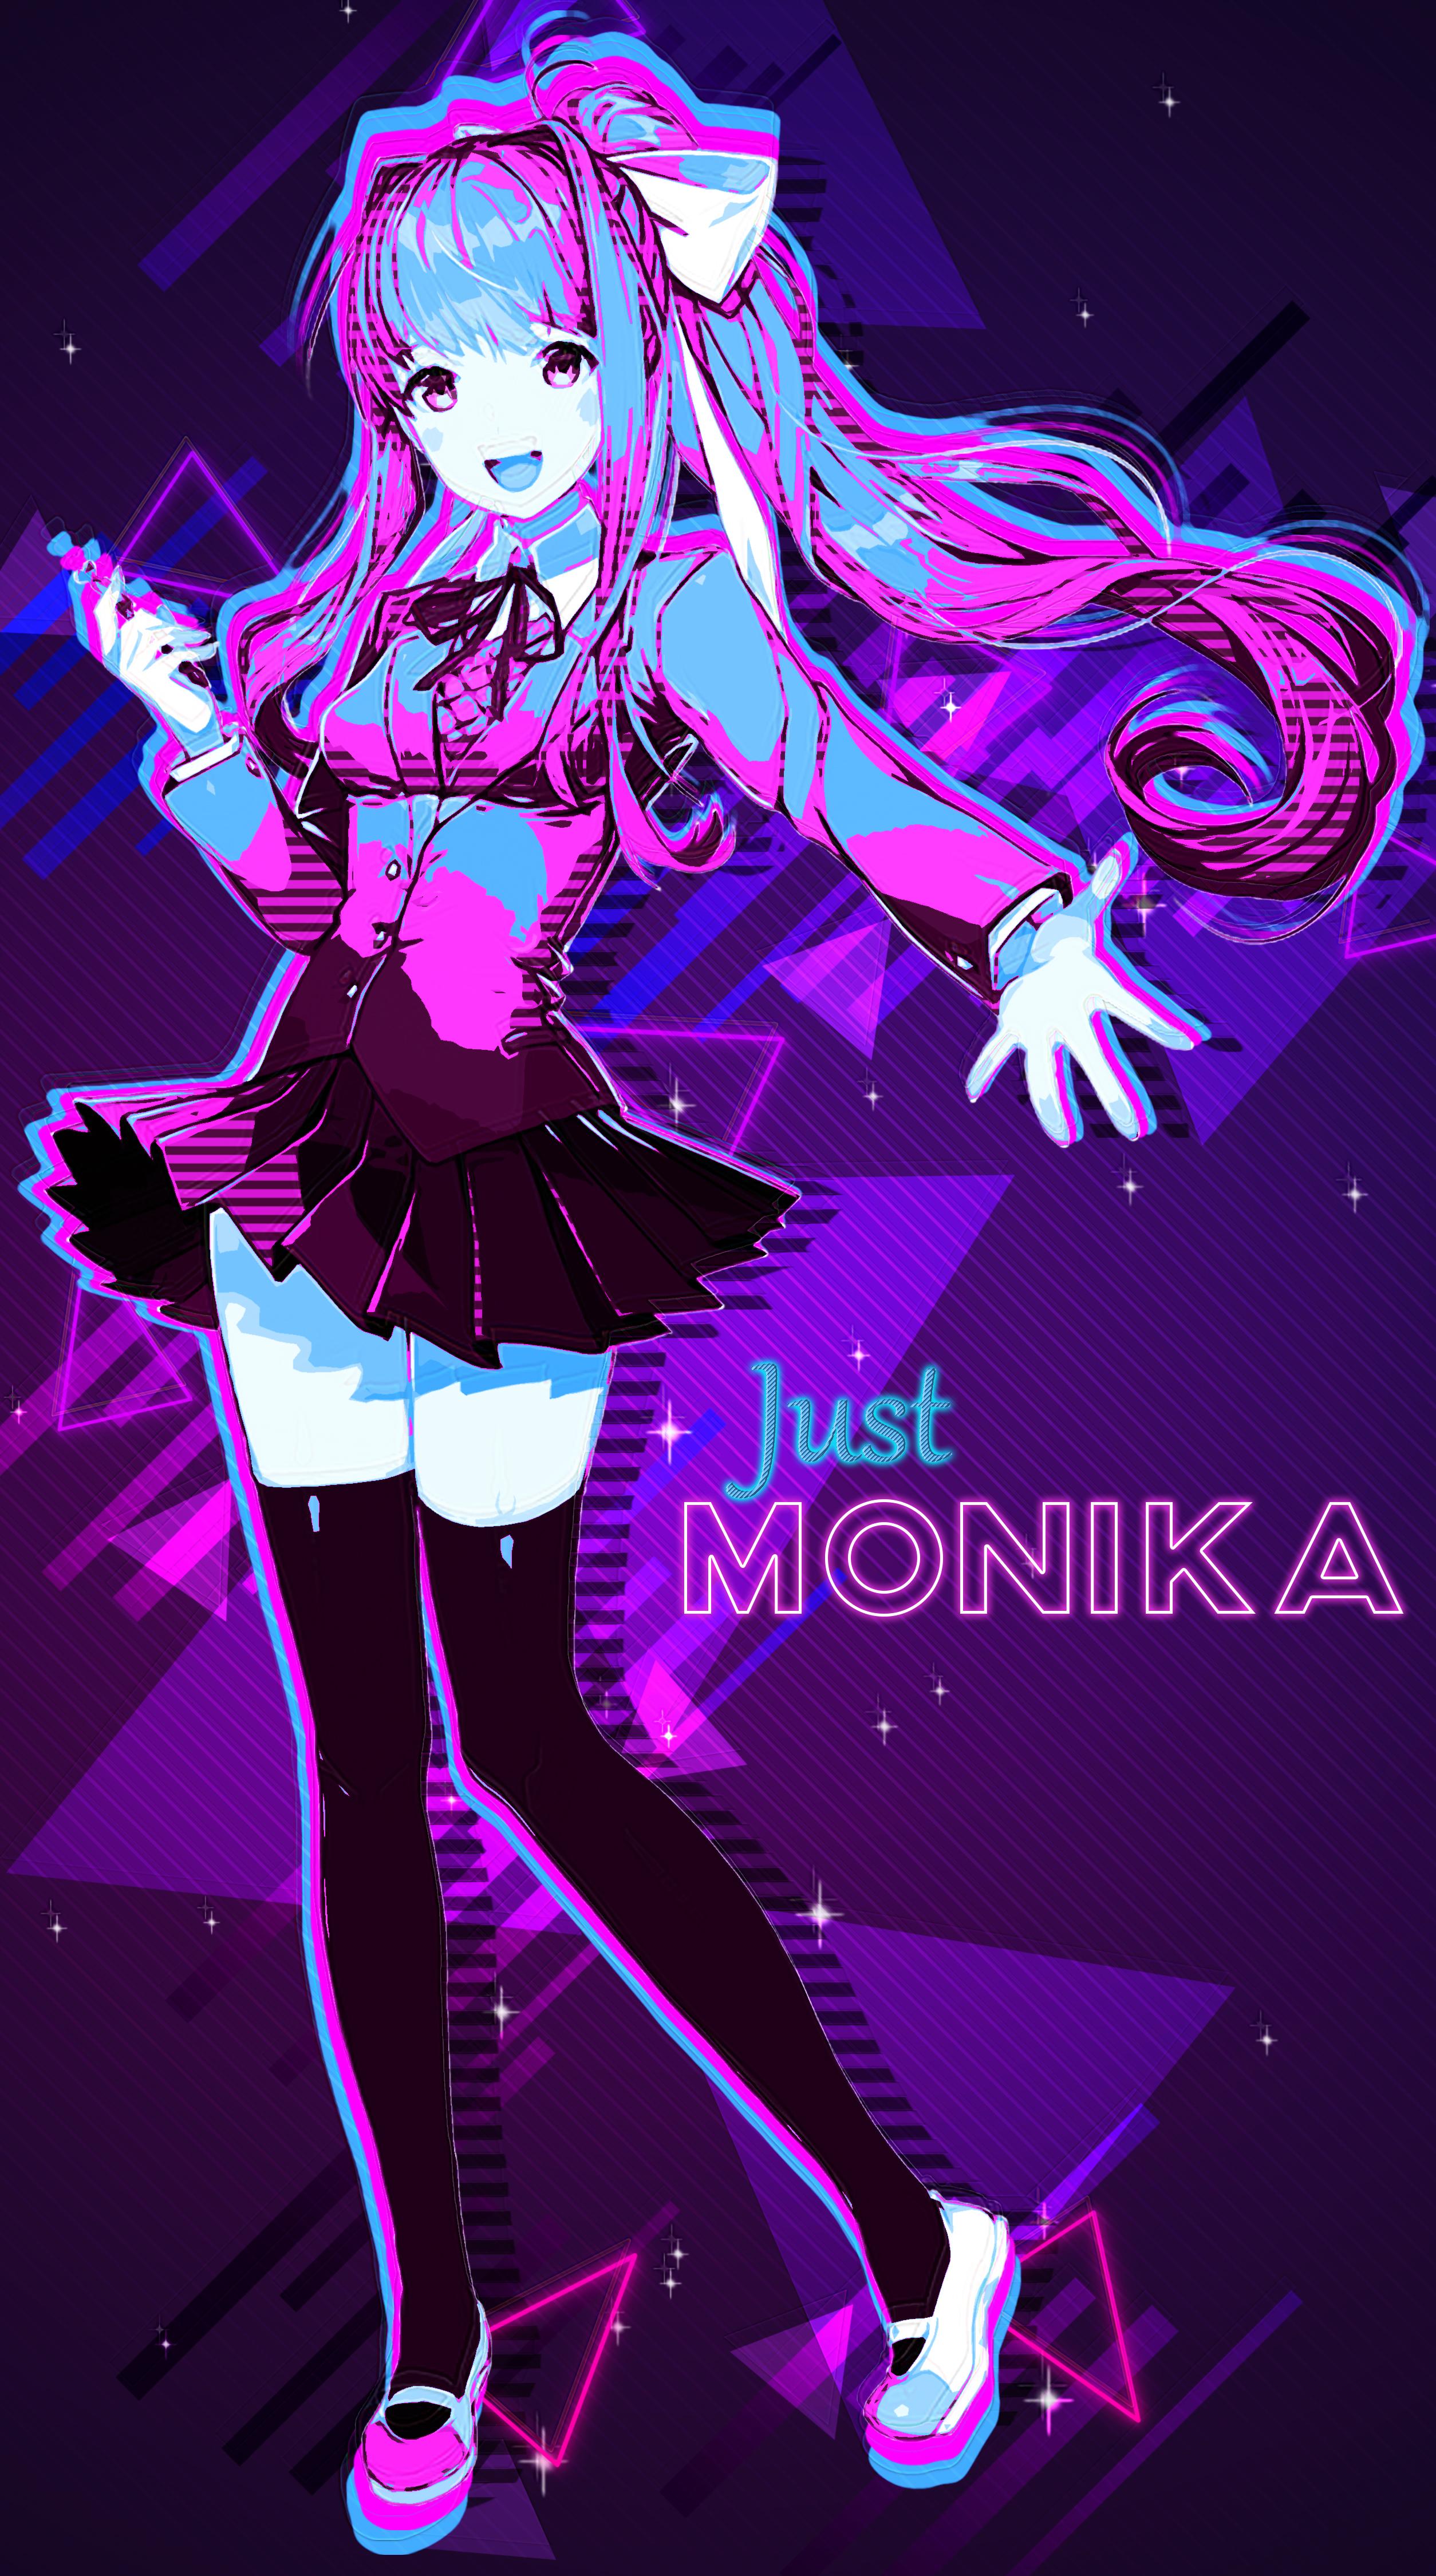 a very trippy 1980s monika wallpaper i made while messing